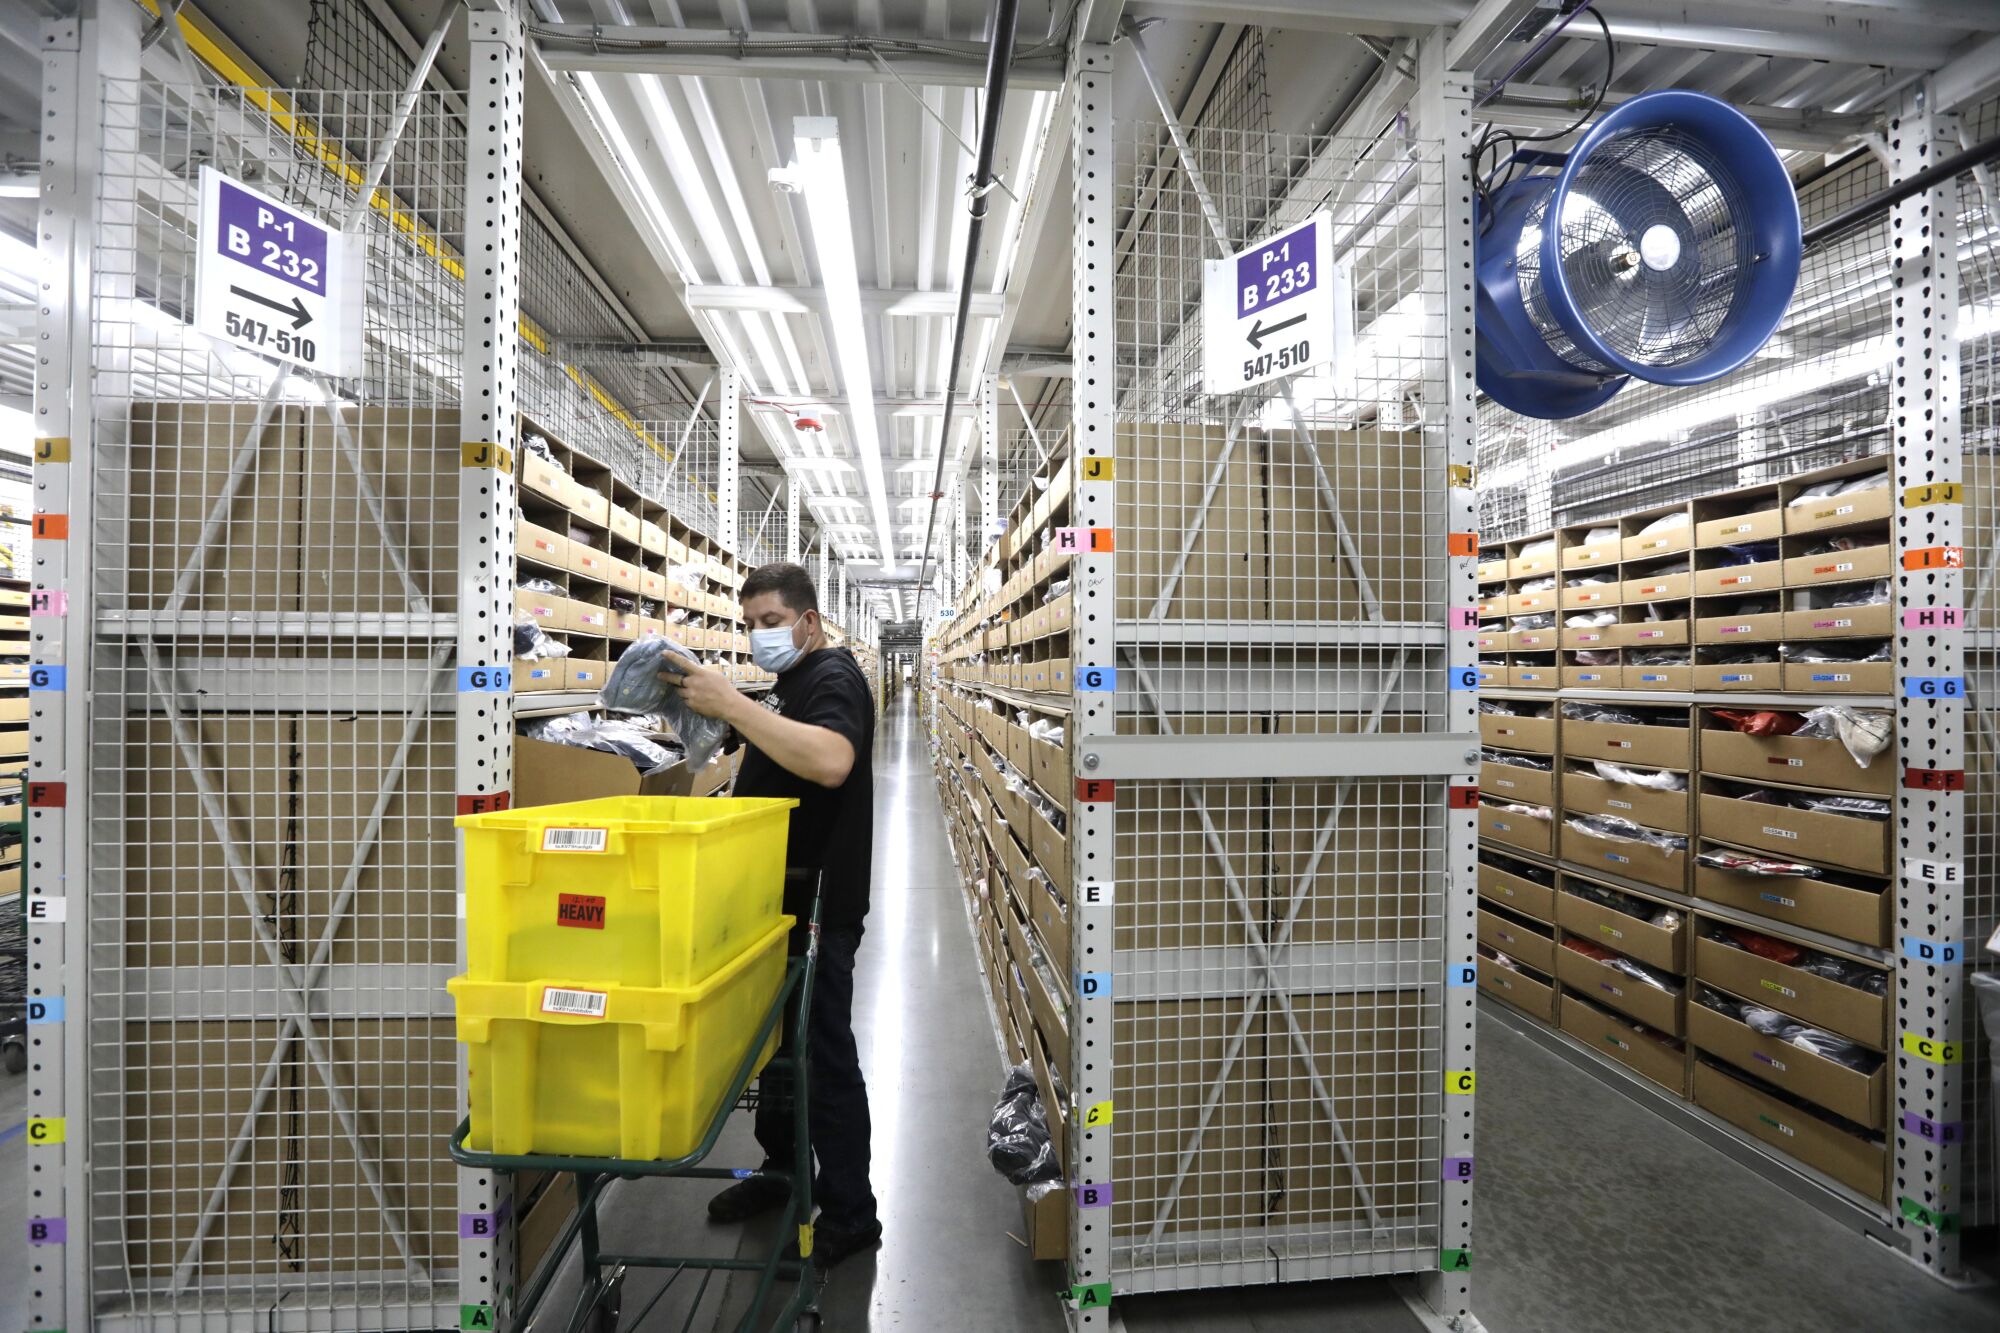 A warehouse worker handles merchandise next to two yellow bins